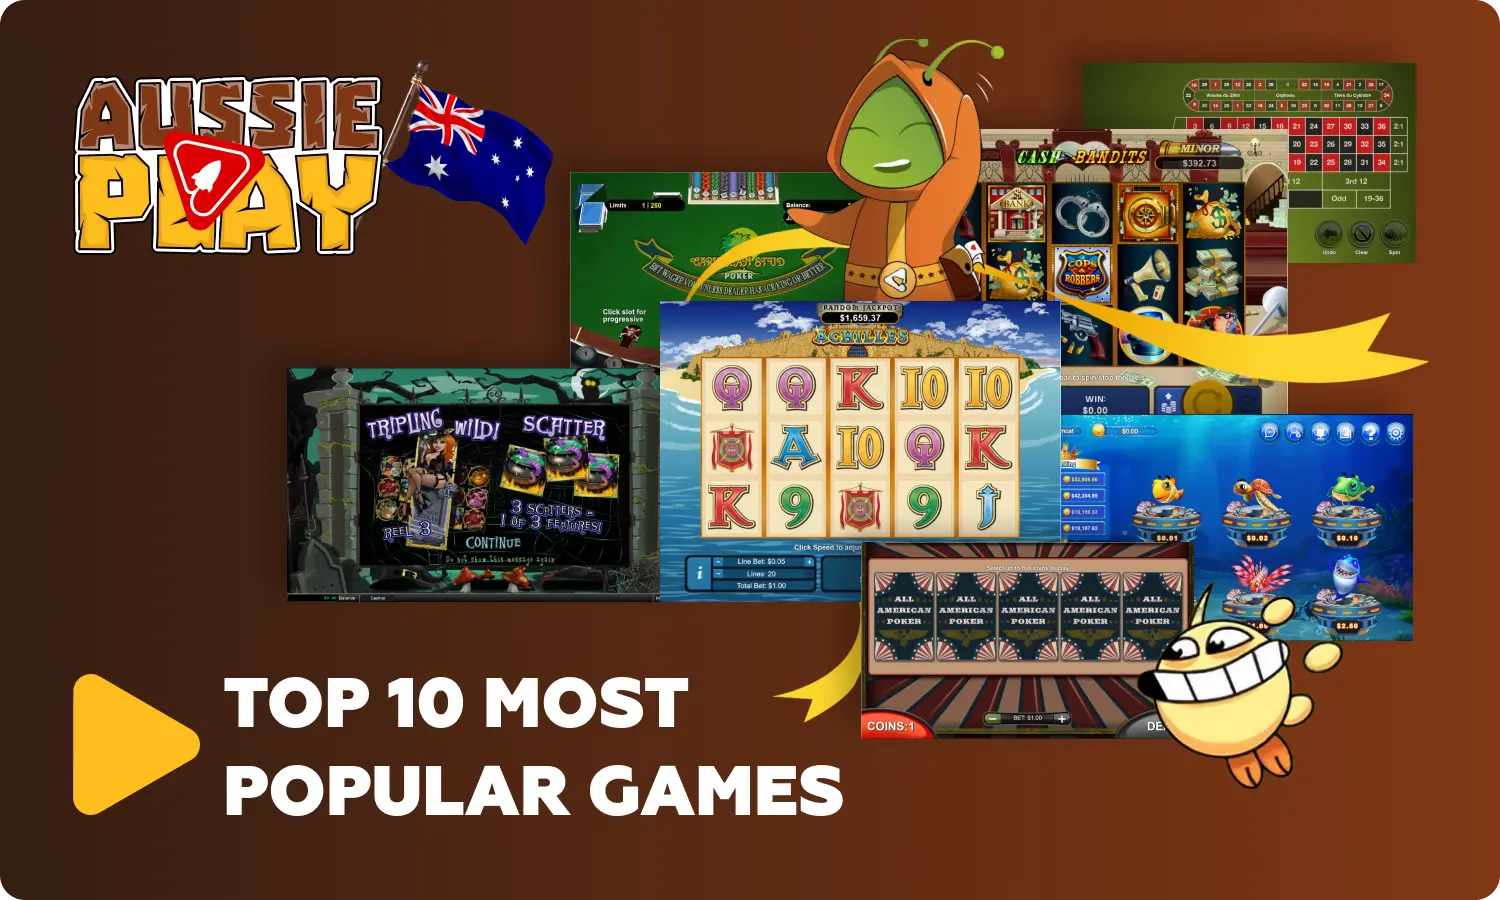 The Aussie Play website provides a list of popular games by category to cater to the diverse preferences of Australian players